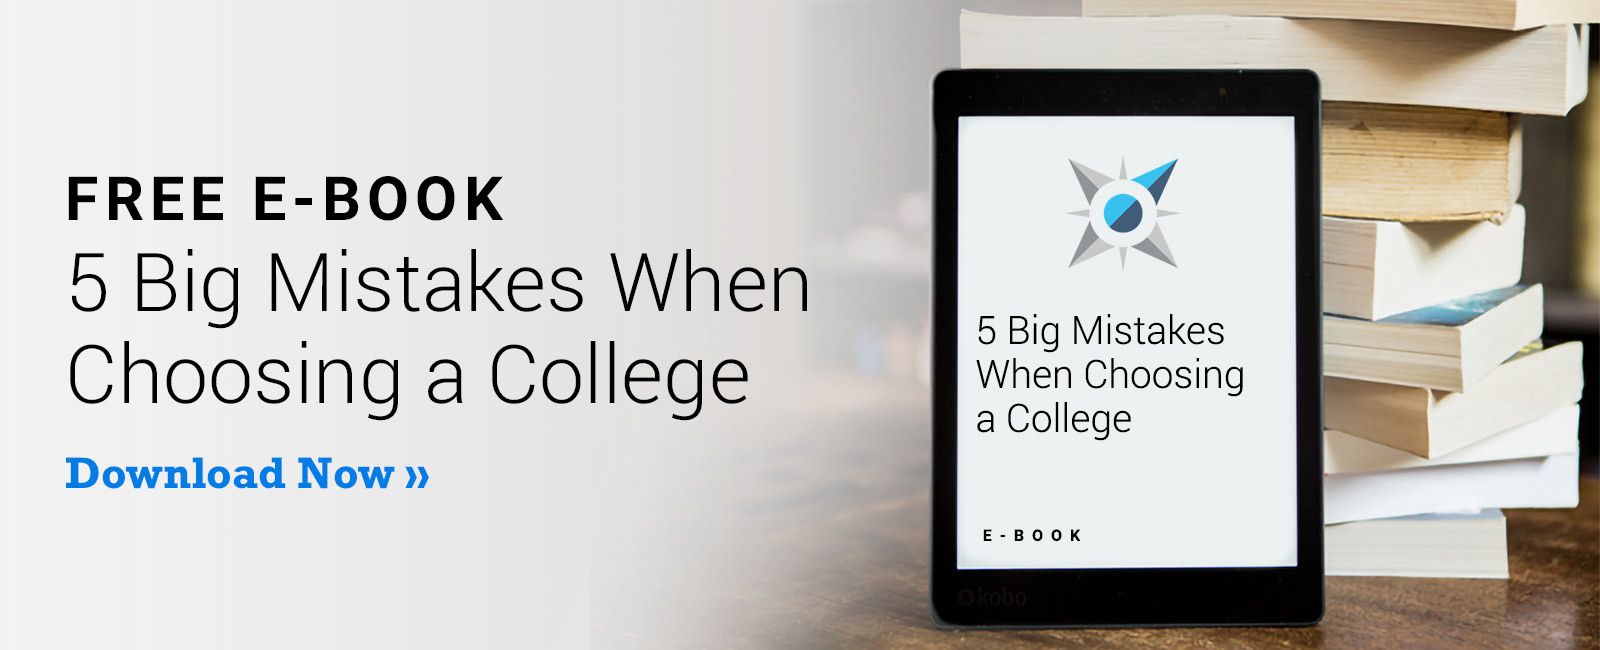 5 big mistakes when applying to college